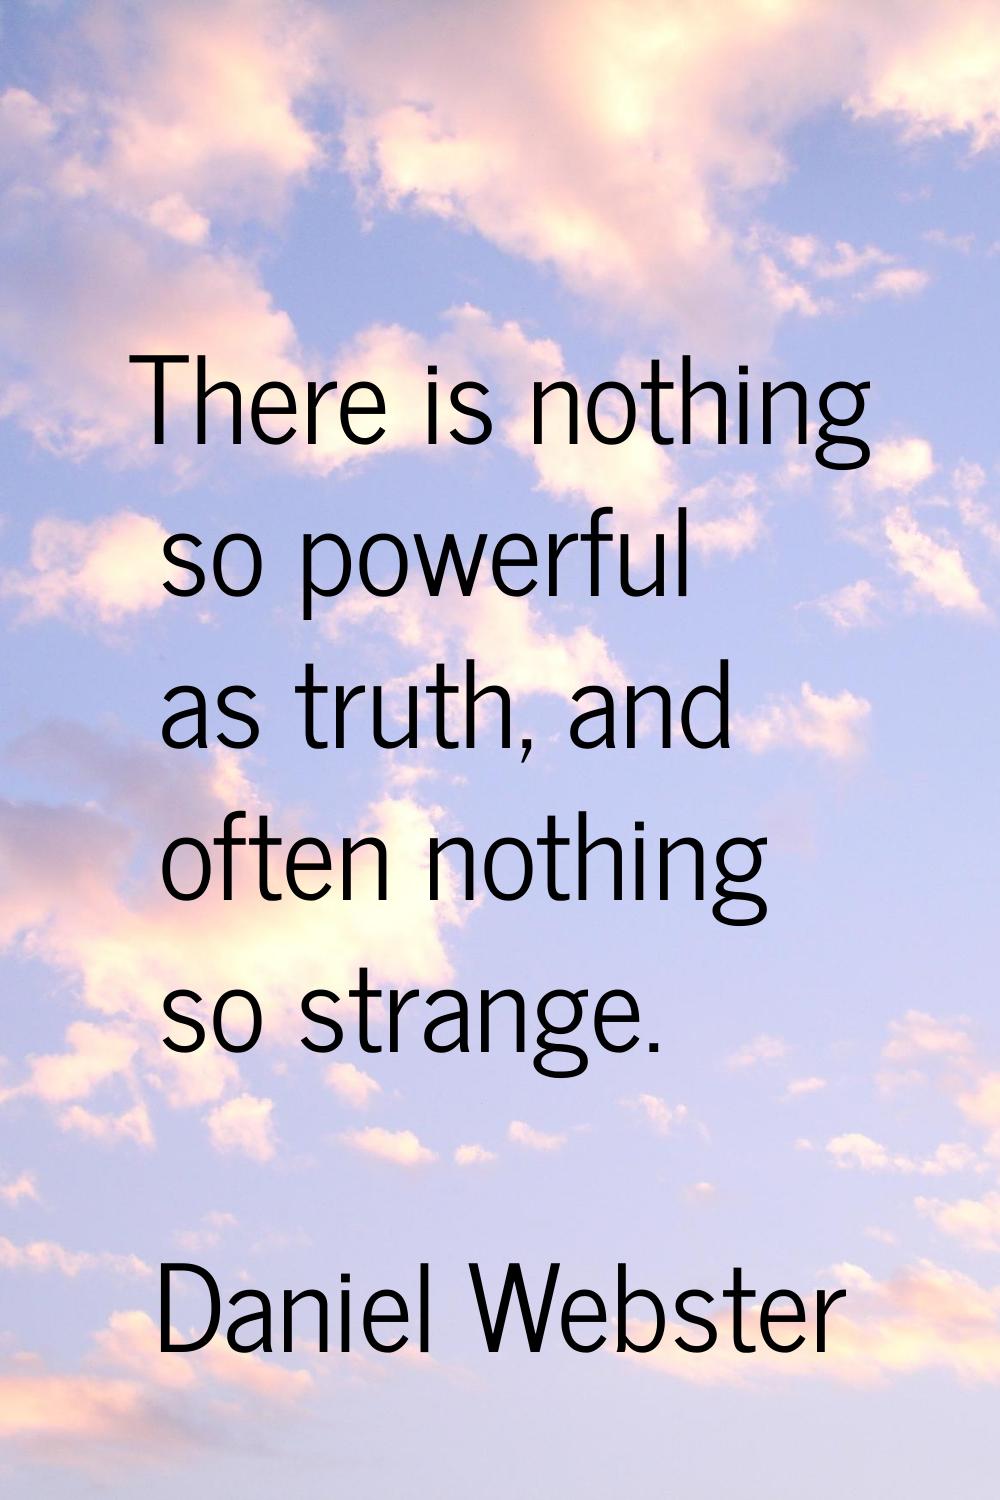 There is nothing so powerful as truth, and often nothing so strange.